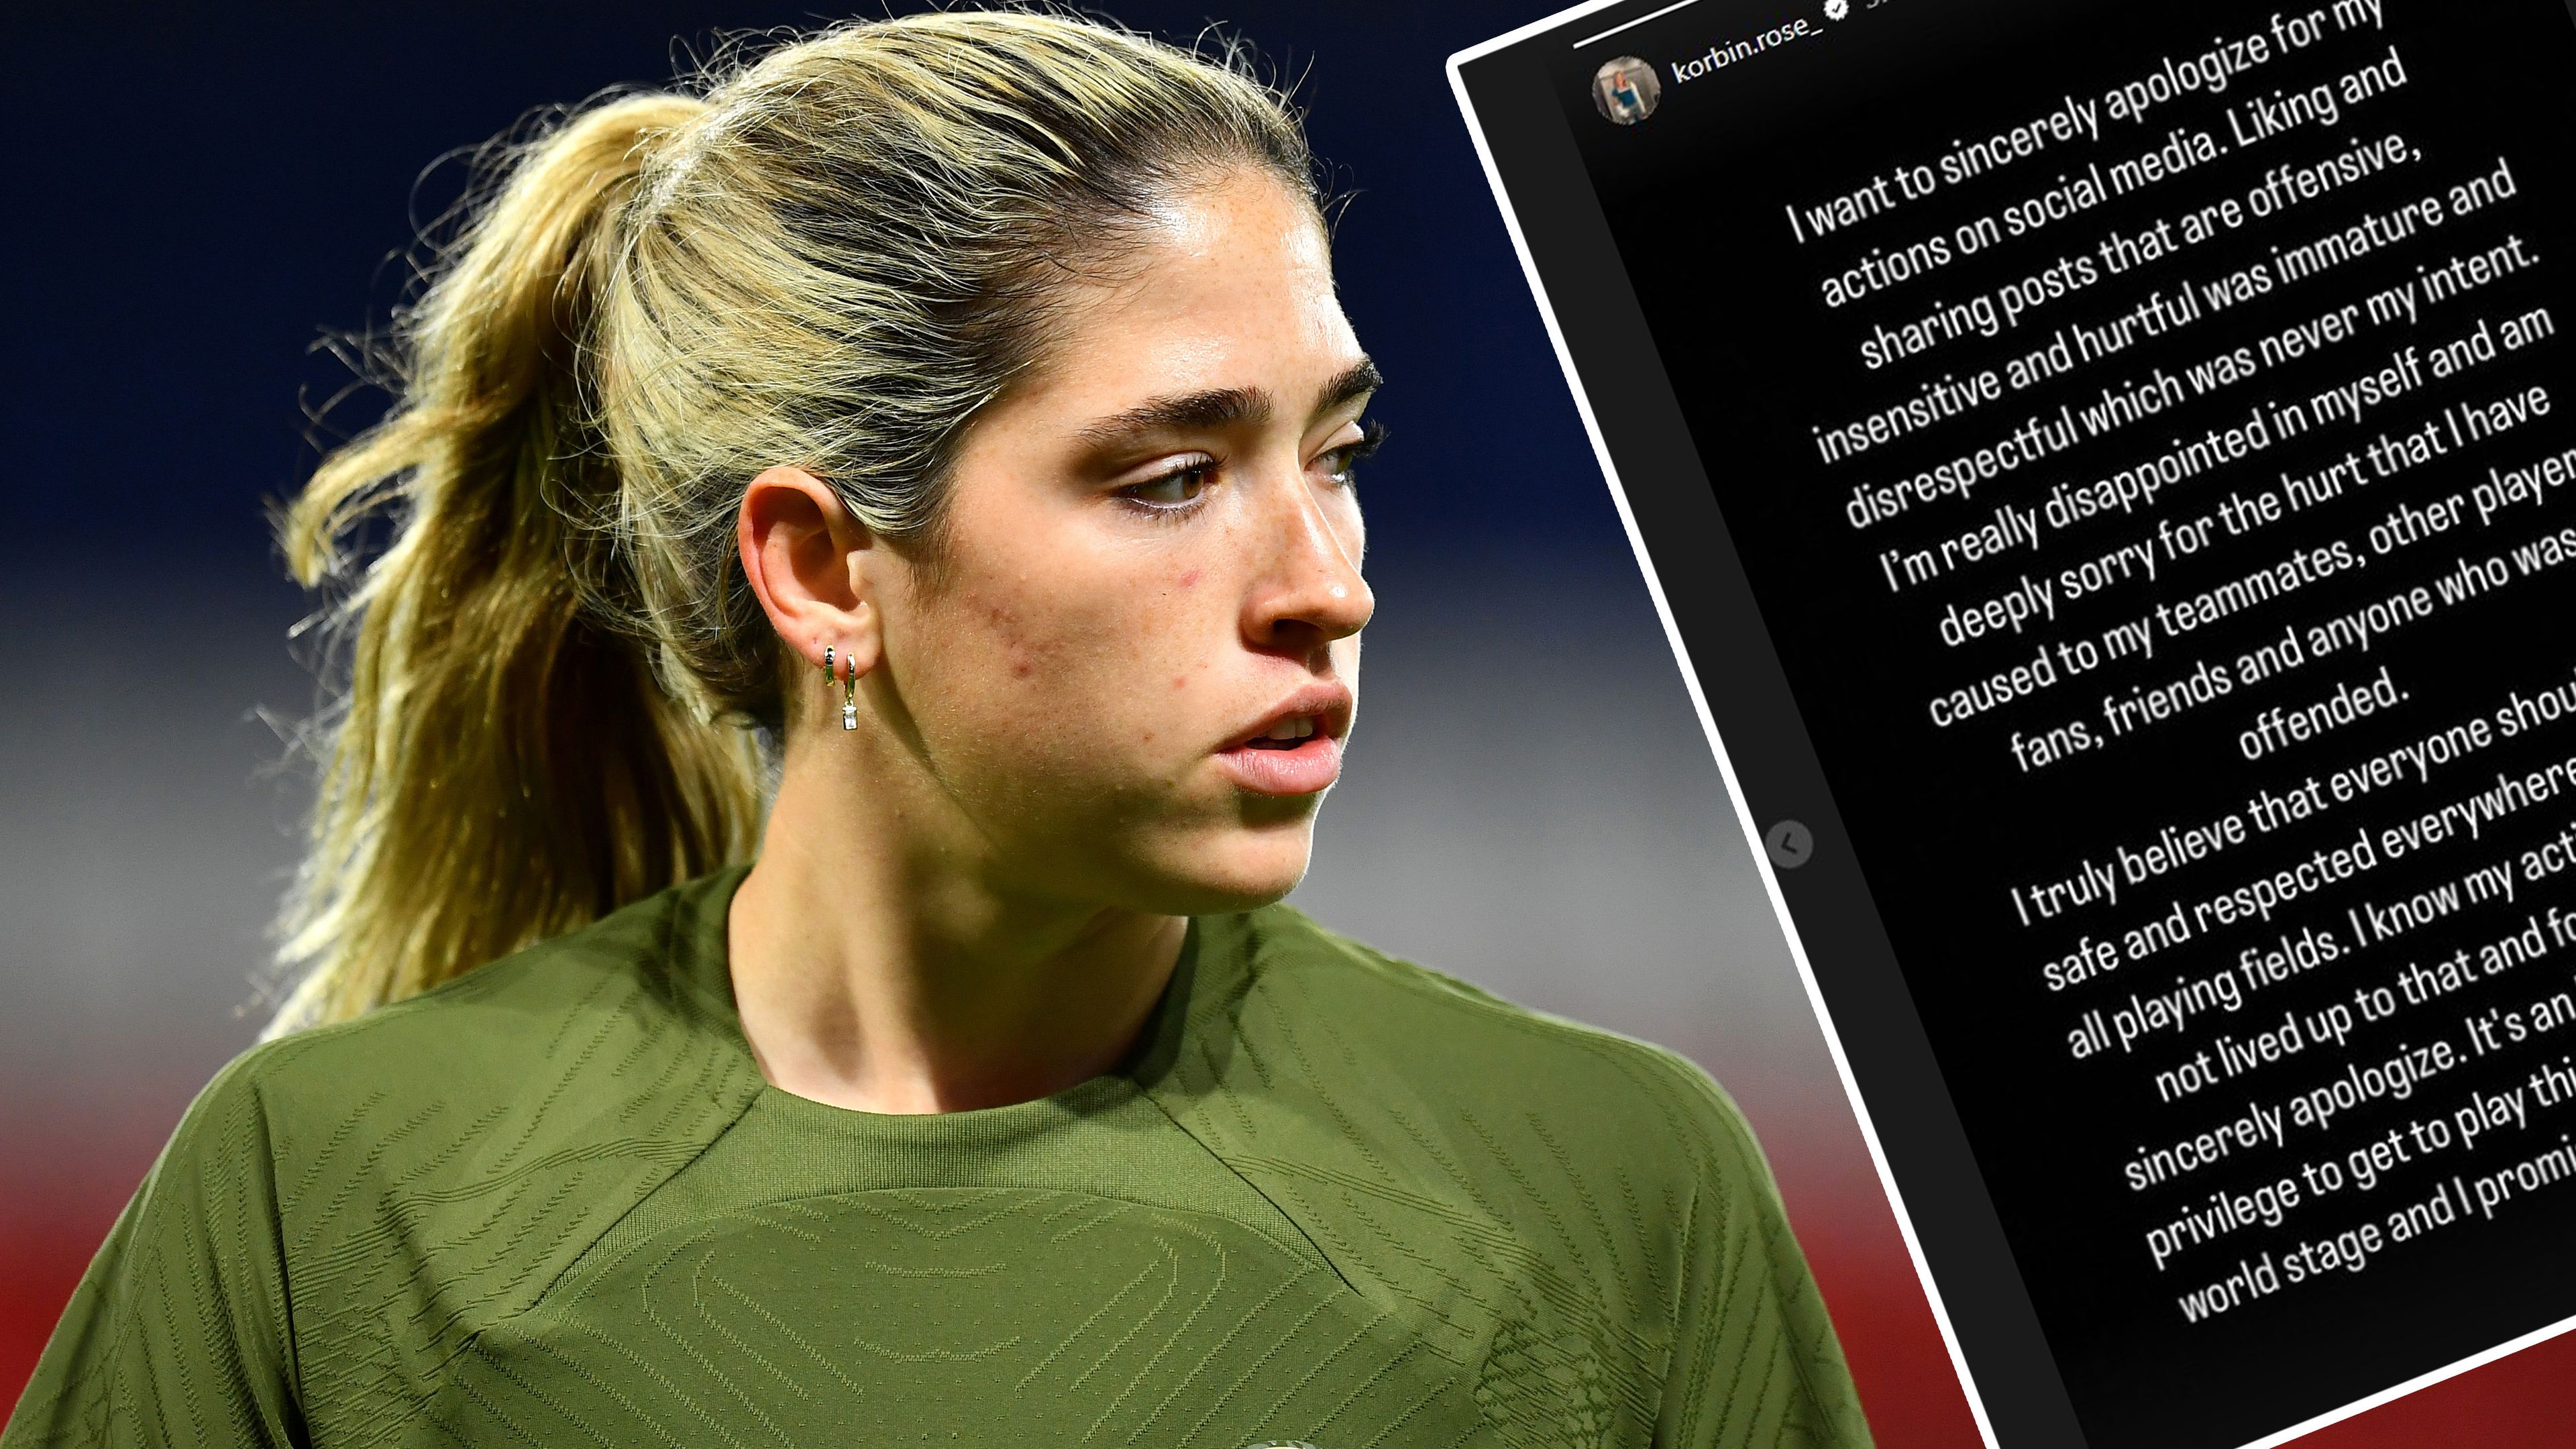 US football star apologises for 'offensive, insensitive and hurtful' social media posts